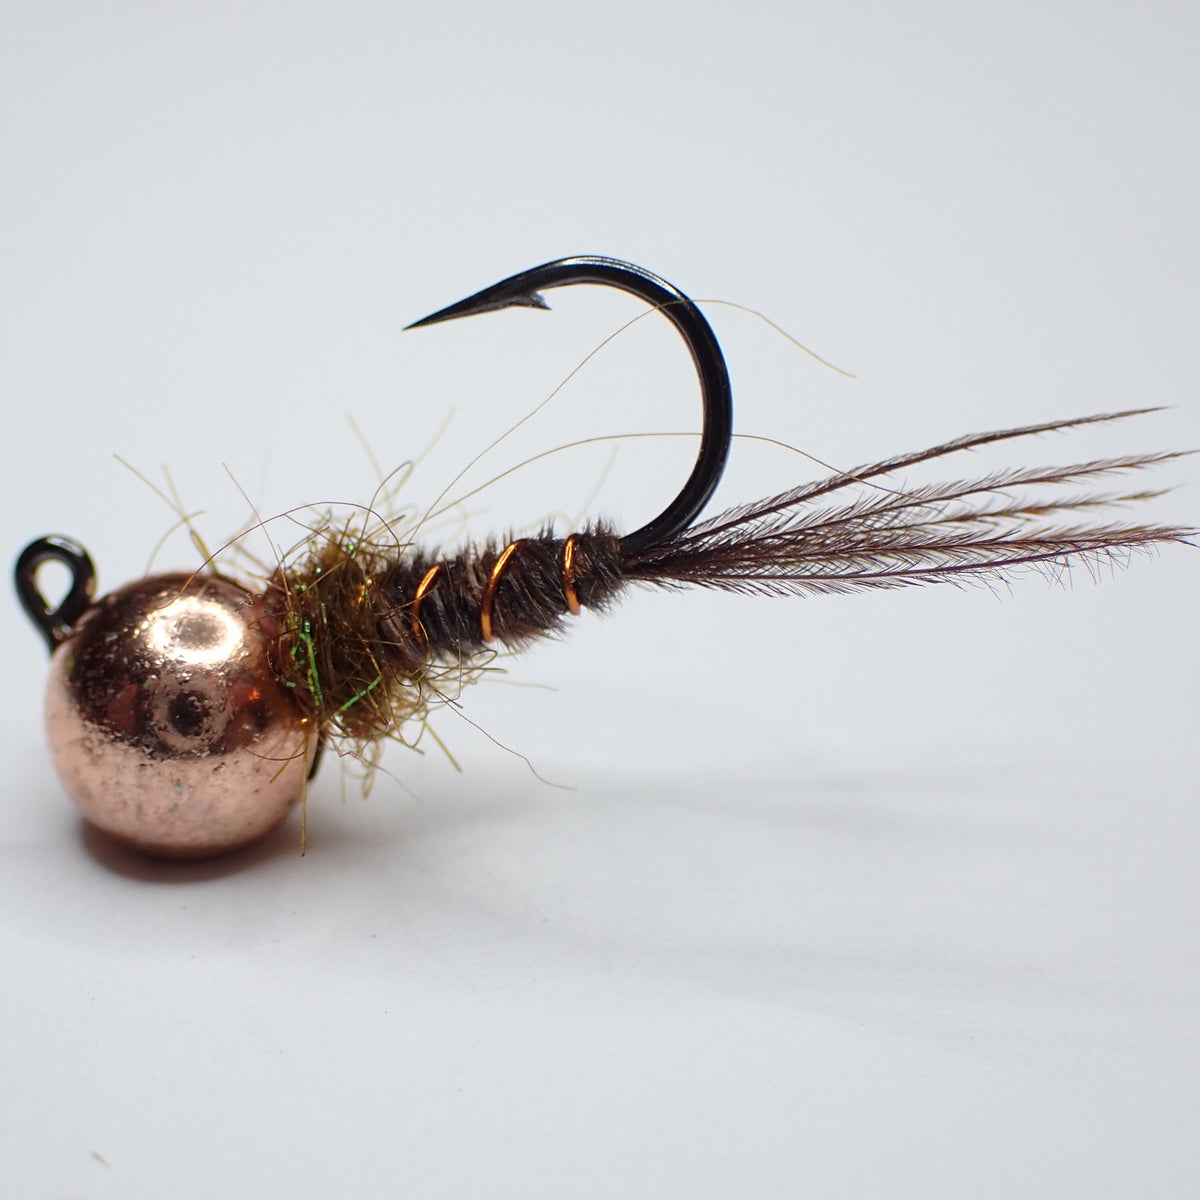 6.4mm Tungsten Frenchy - Ice Fly – Si Flies